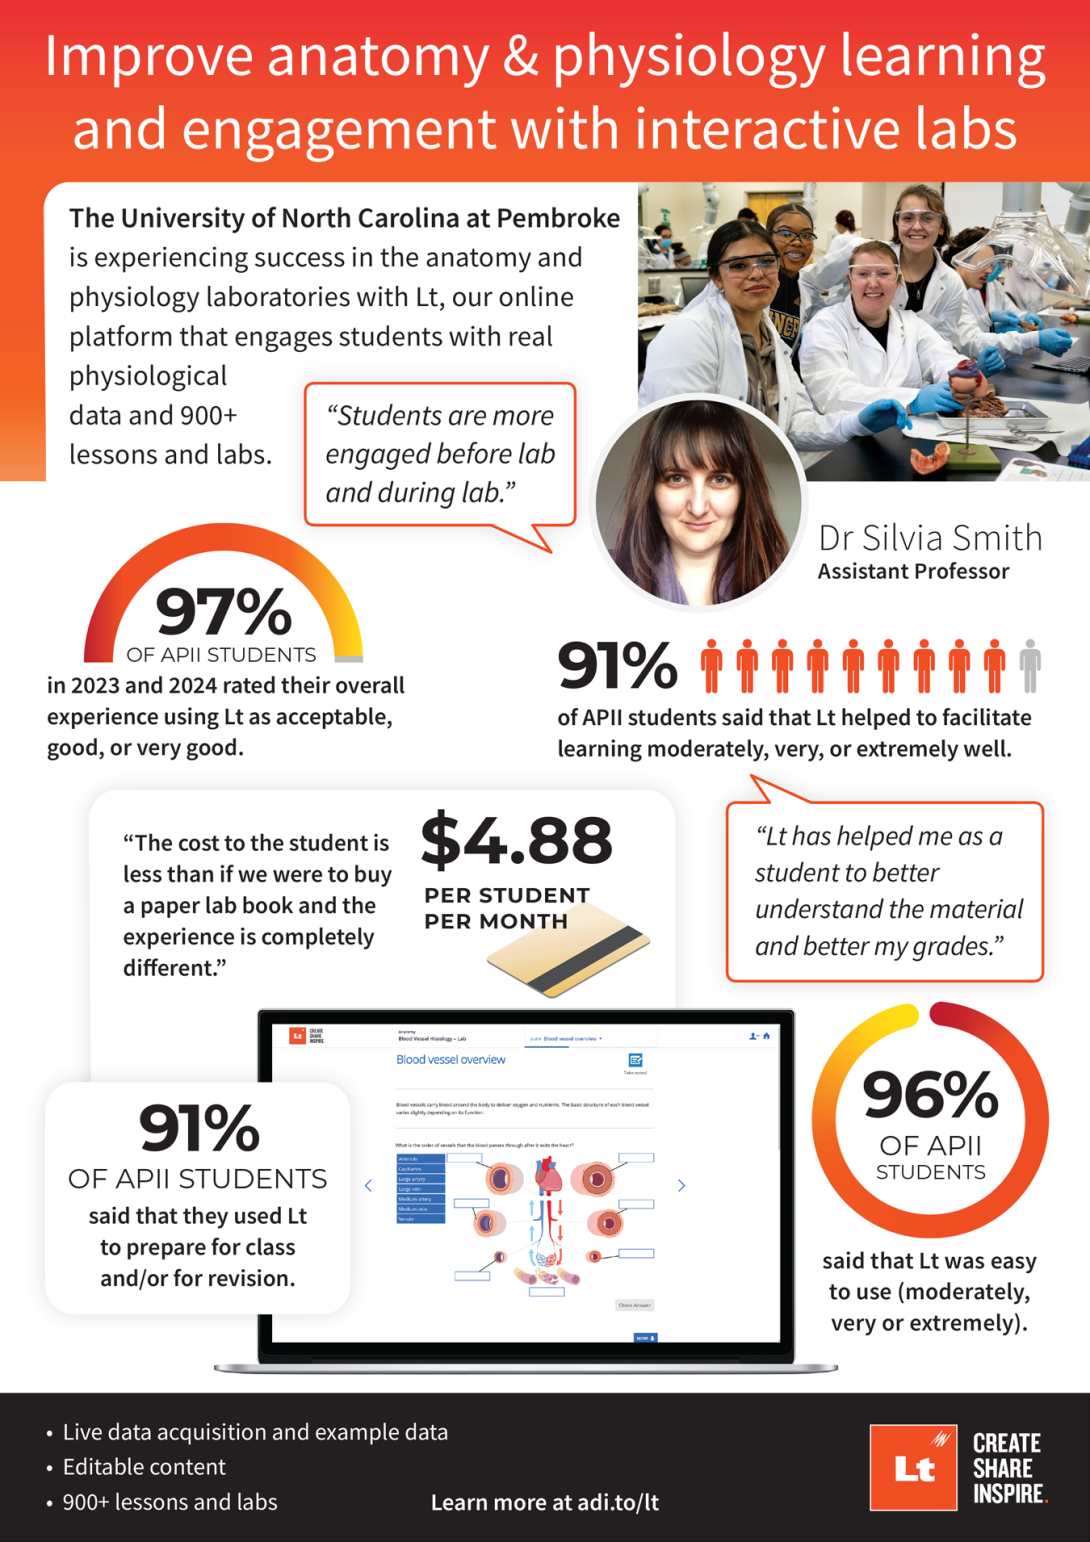 An infographic showing key Lt statistics from the University of North Carolina at Pembroke.